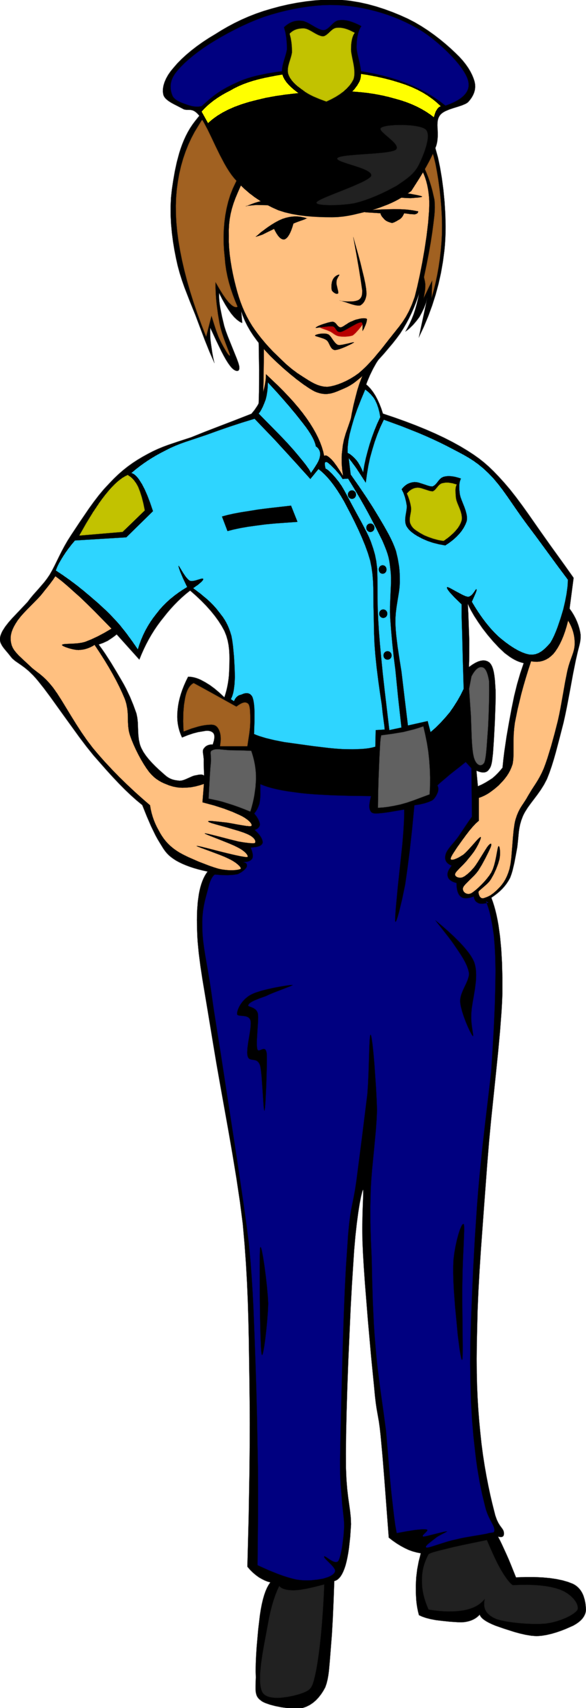 Police Clipart Images - ClipArt Best